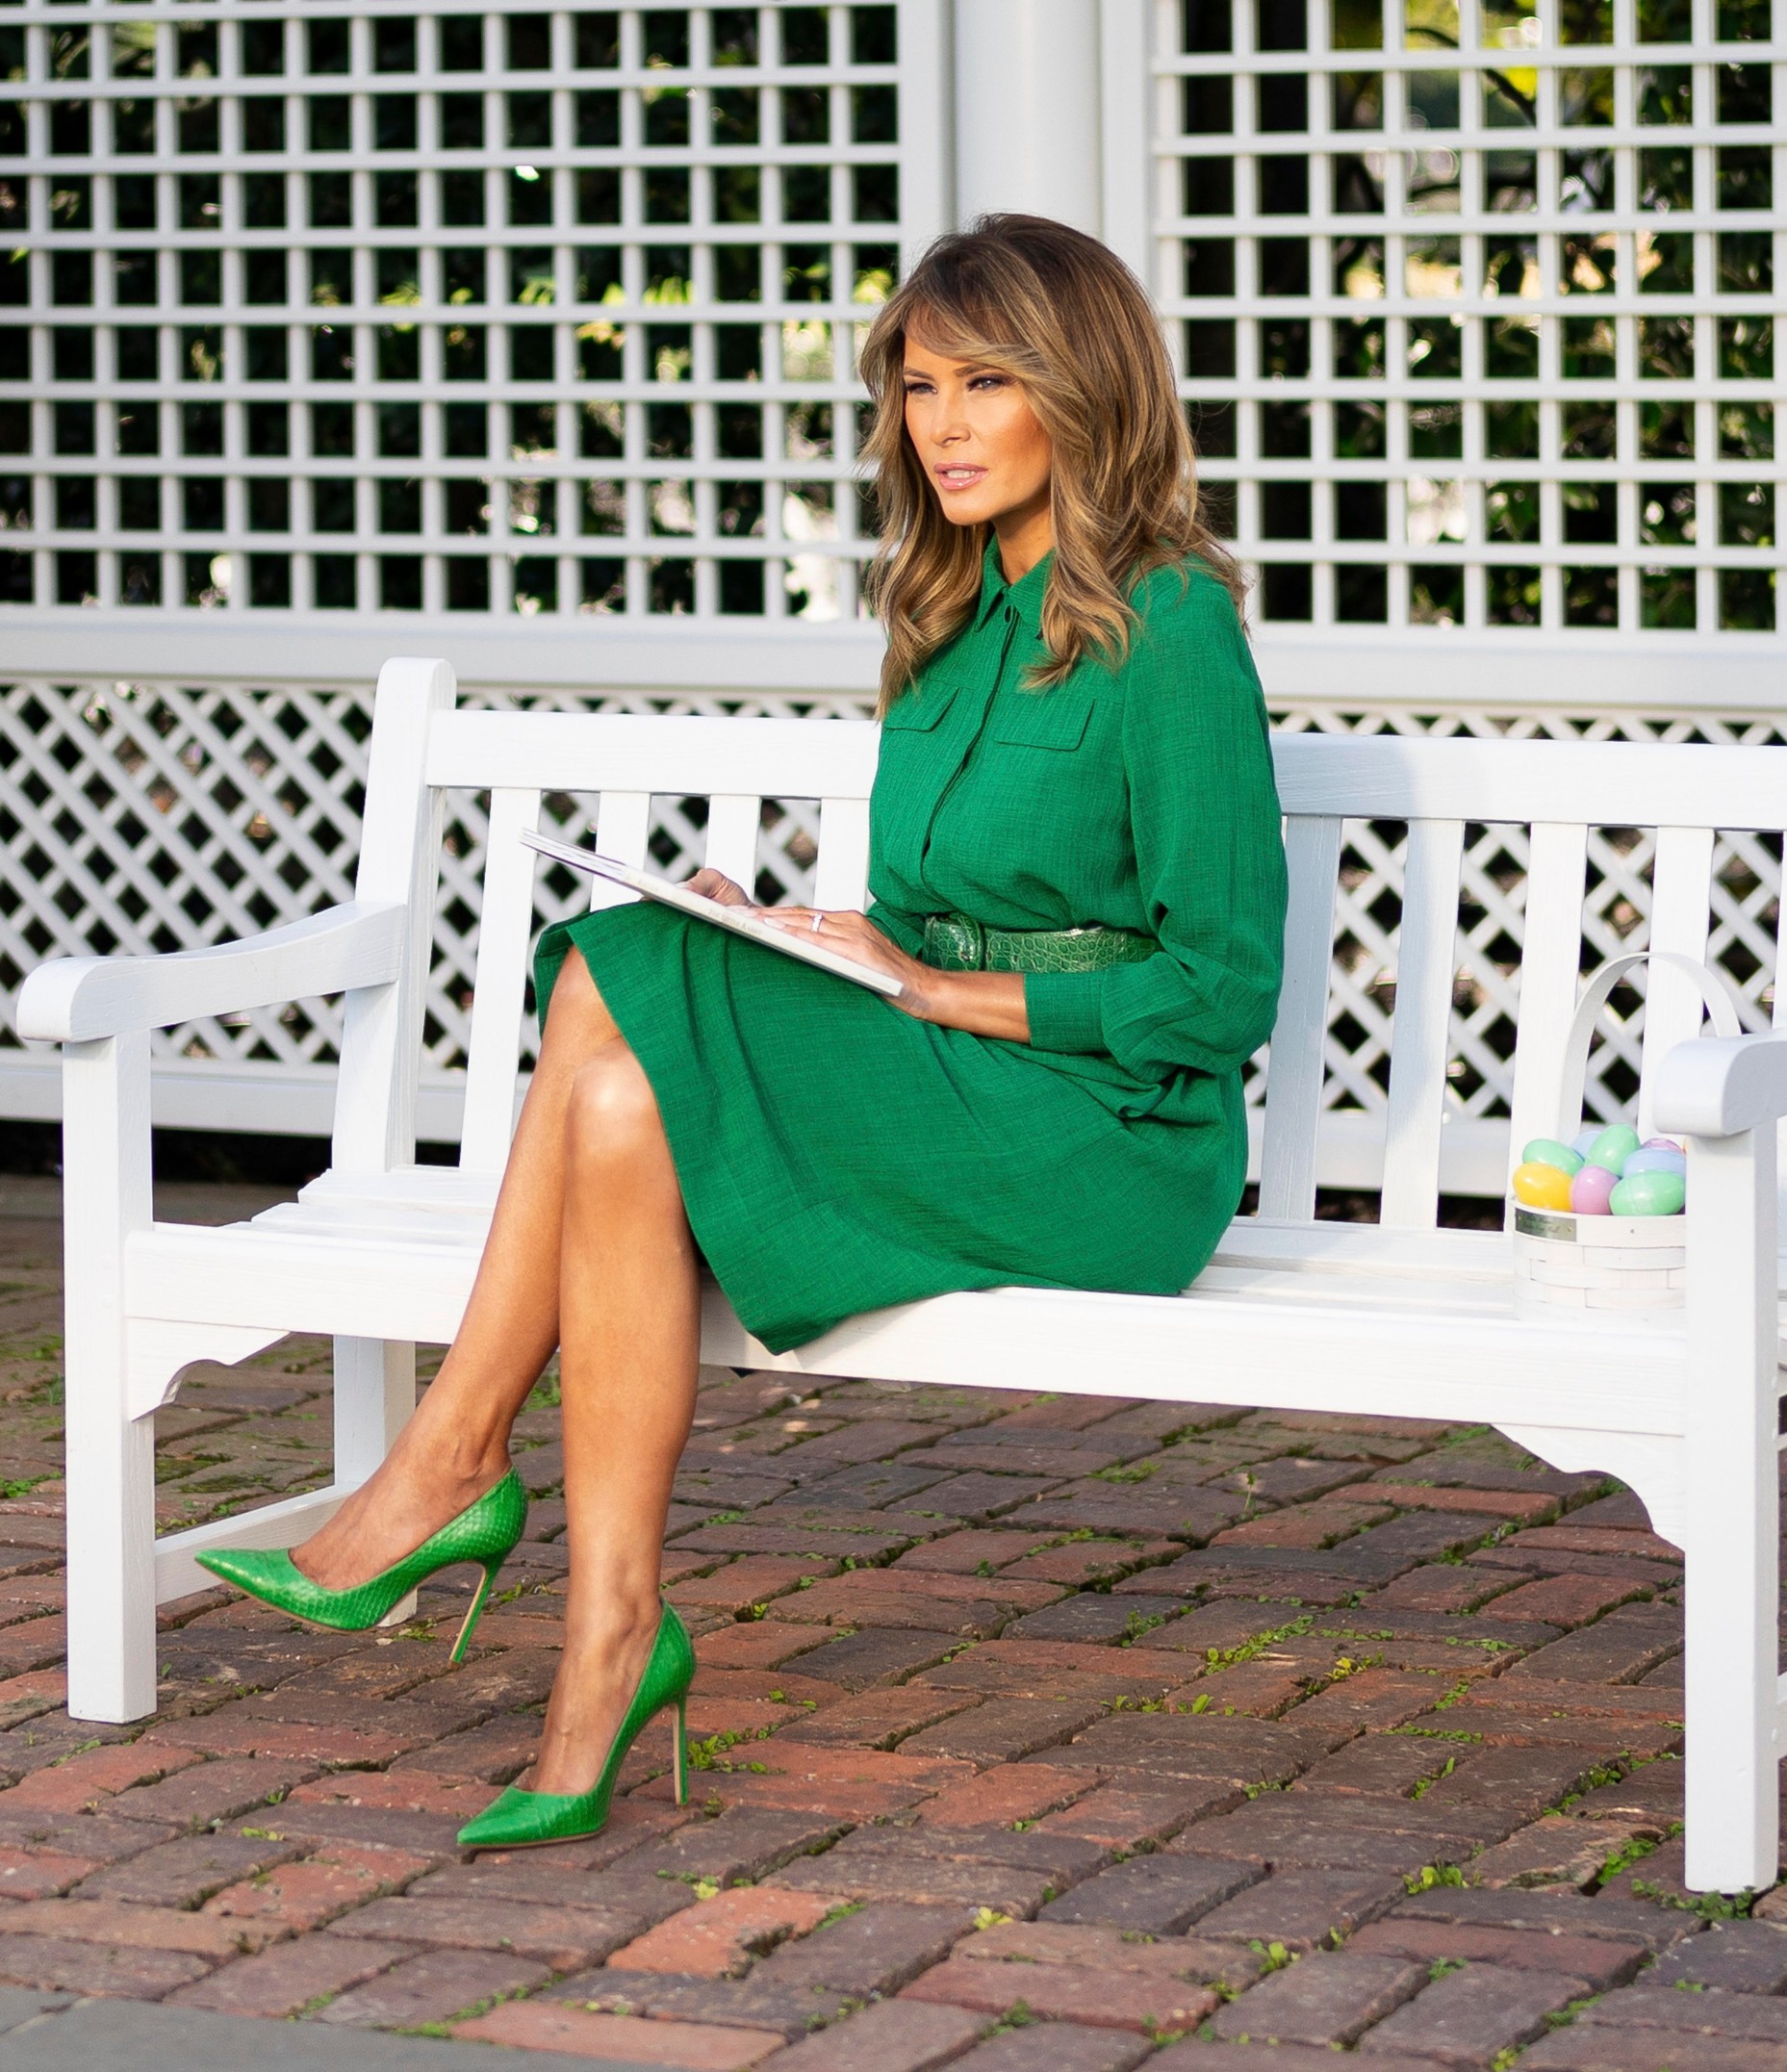 April 8, 2020, Washington, DC, United States of America: U.S First Lady Melania Trump, reads the book The Little Rabbit by Nicola Killen during a video recording to be shared online with children for Easter in the Kennedy Garden of the White House April 8, 2020 in Washington, DC., Image: 513800940, License: Rights-managed, Restrictions: , Model Release: no, Credit line: Andrea Hanks/White House / Zuma Press / Profimedia